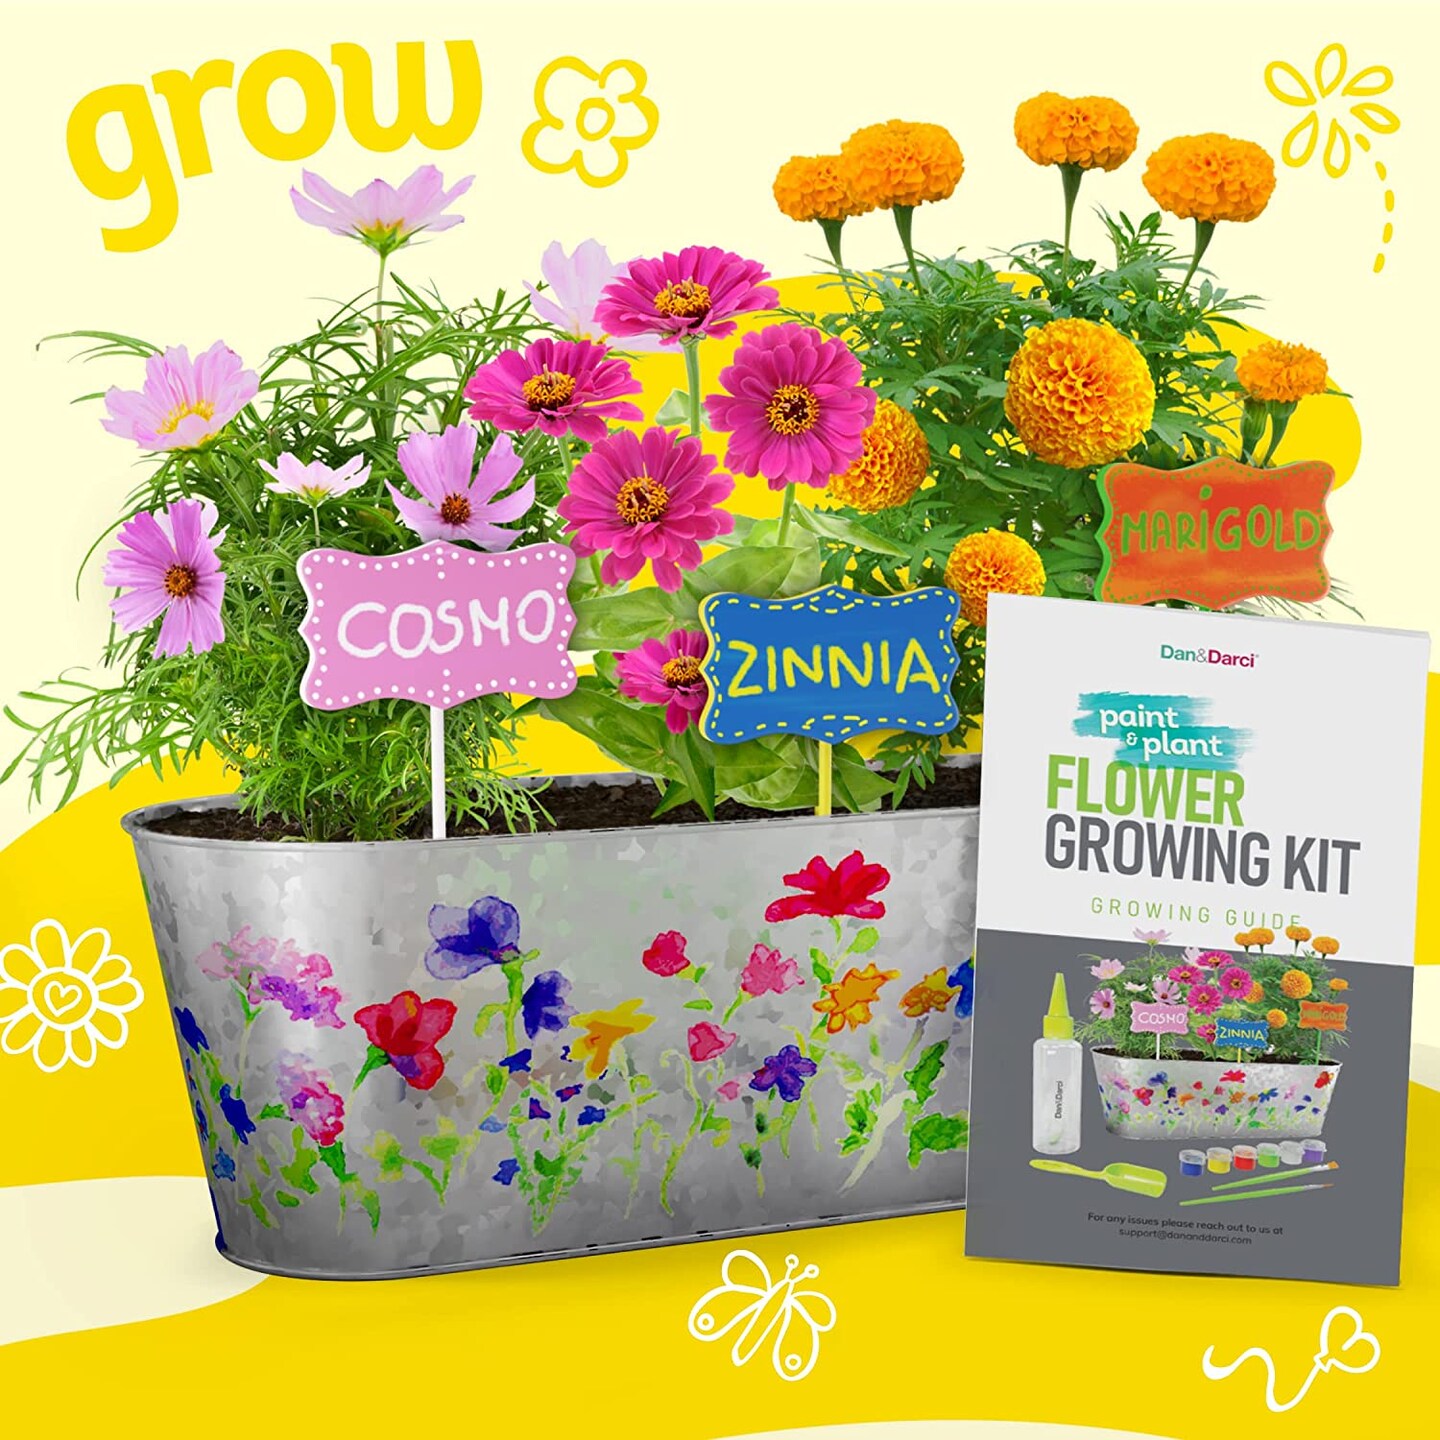 Paint &#x26; Plant Flower Craft Kit for Kids - Best Birthday Science Crafts Gifts for Girls &#x26; Boys Age 5 6 7 8-12 Year Old Girl Gift - Children Gardening Kits, Art Projects Toys for Ages 5-12 years